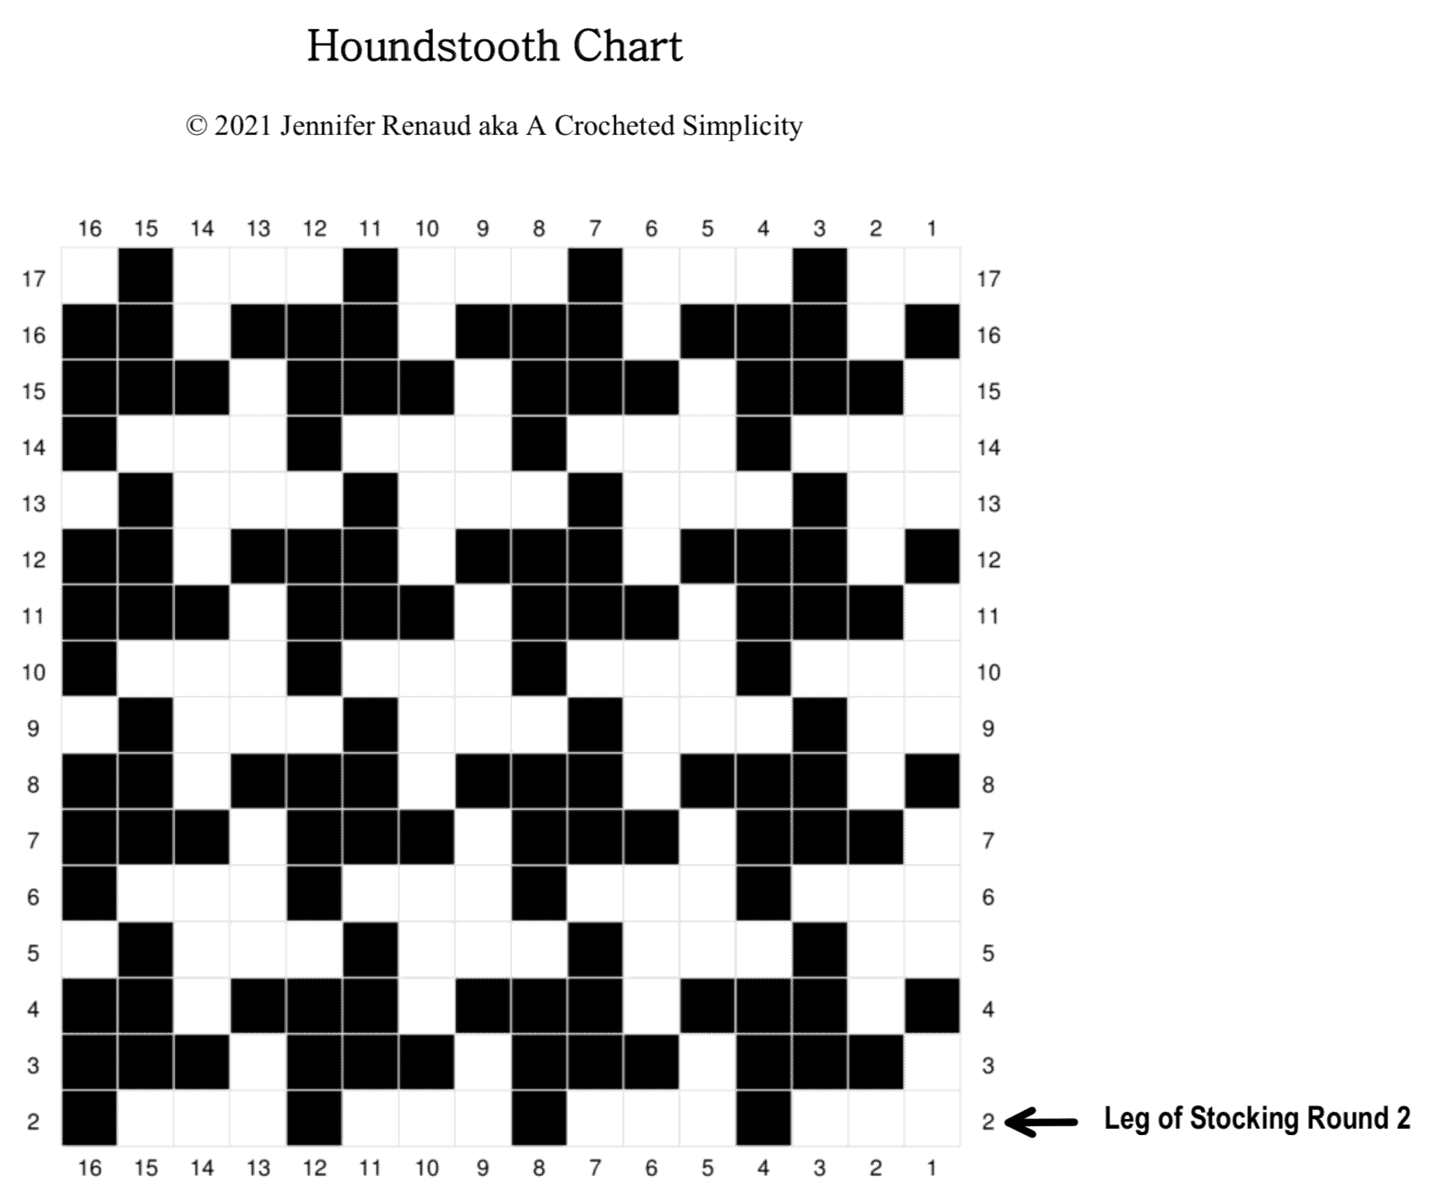 Houndstooth crochet tapestry chart for a Christmas stocking pattern.